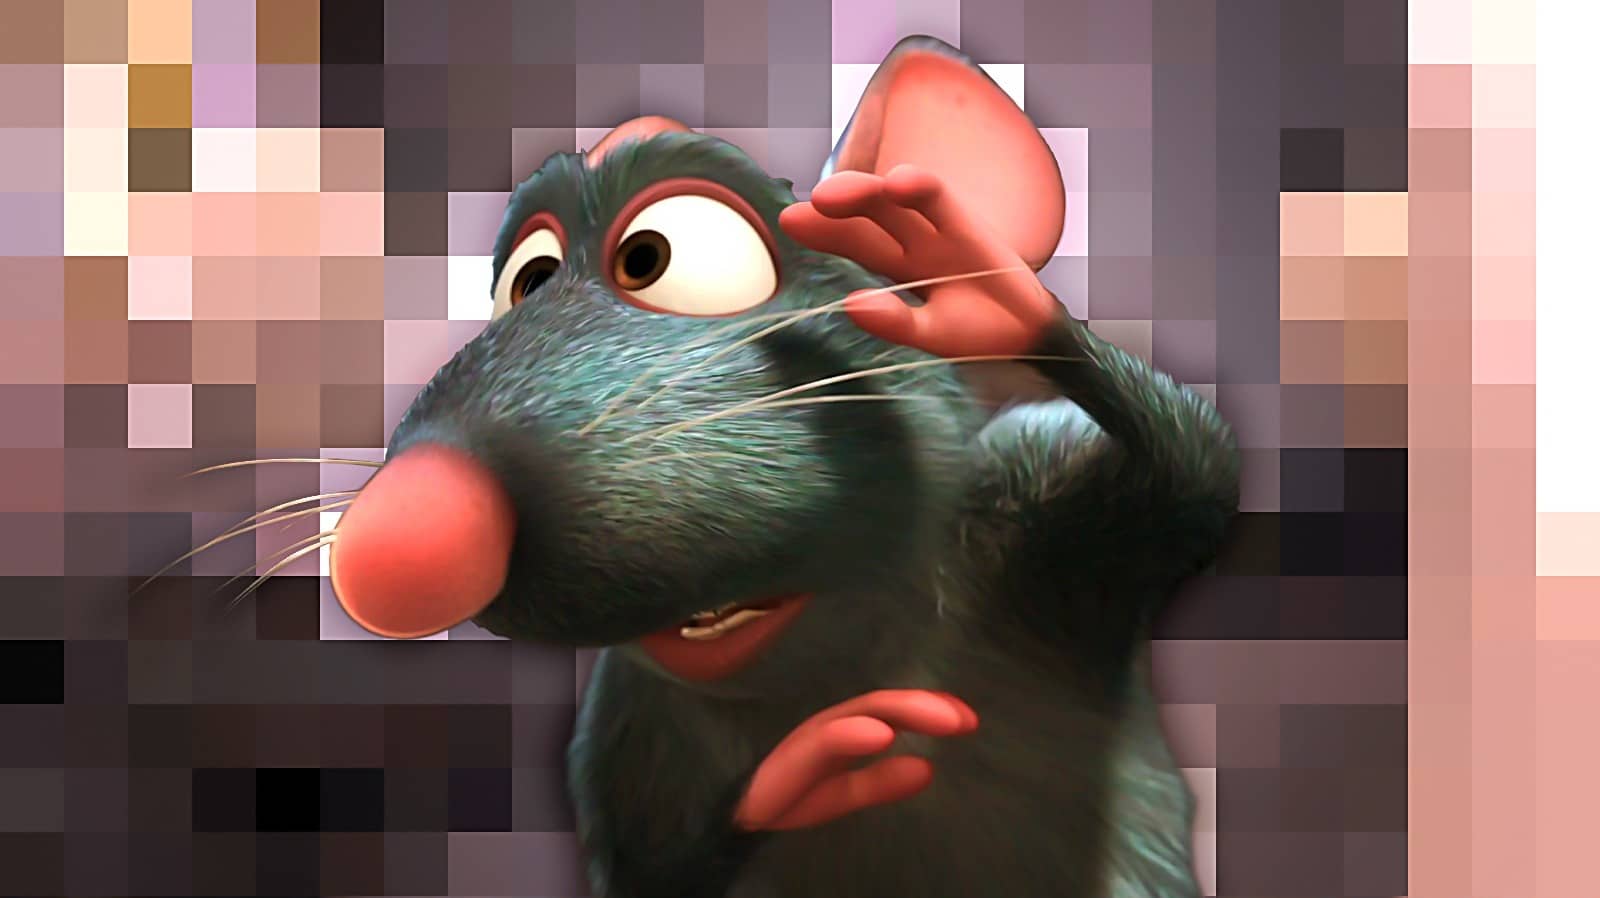 Pixar's Ratatouille Does Have A Scene With Nudity 1